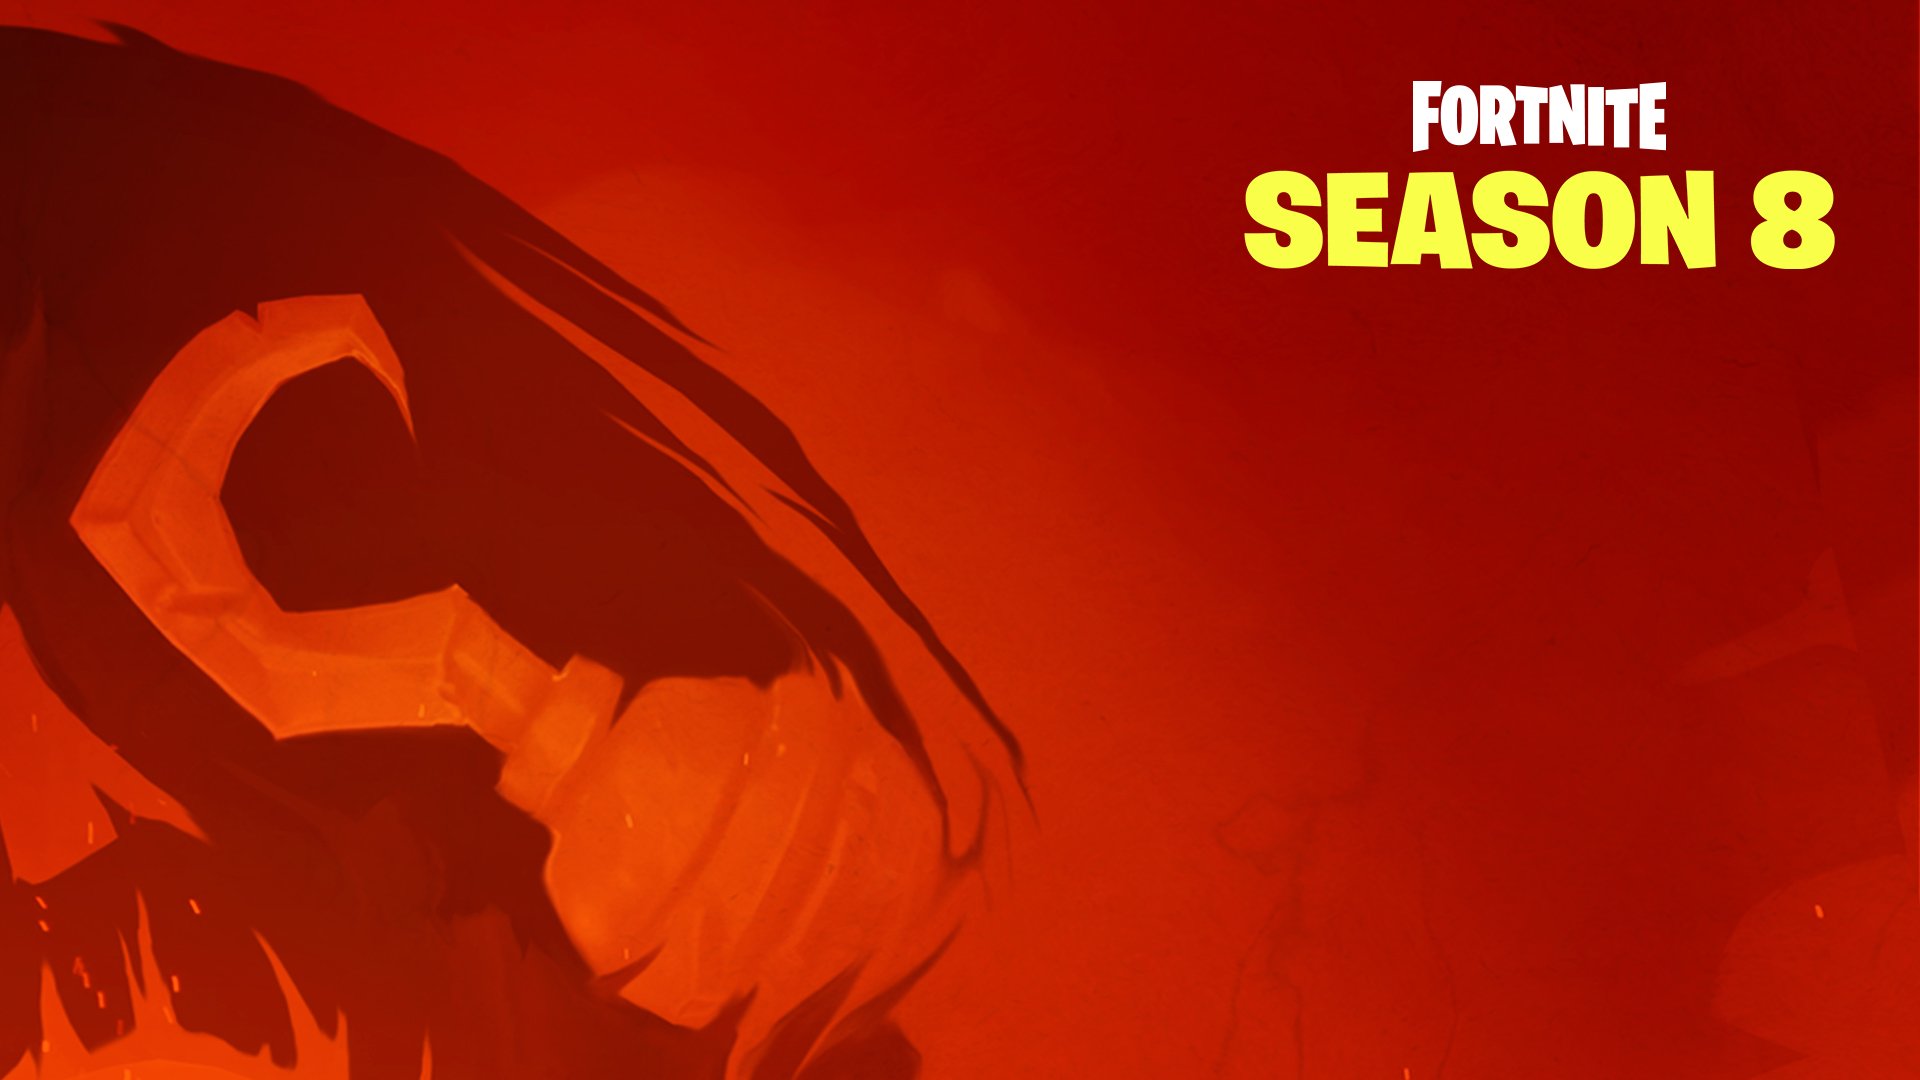 Fortnite Season 8 Guide Challenge Guides Battle Pass Information - the first teaser is what looks to be some red hot flames with the silhouette of a traditional looking pirate s hook there s been some speculation that the